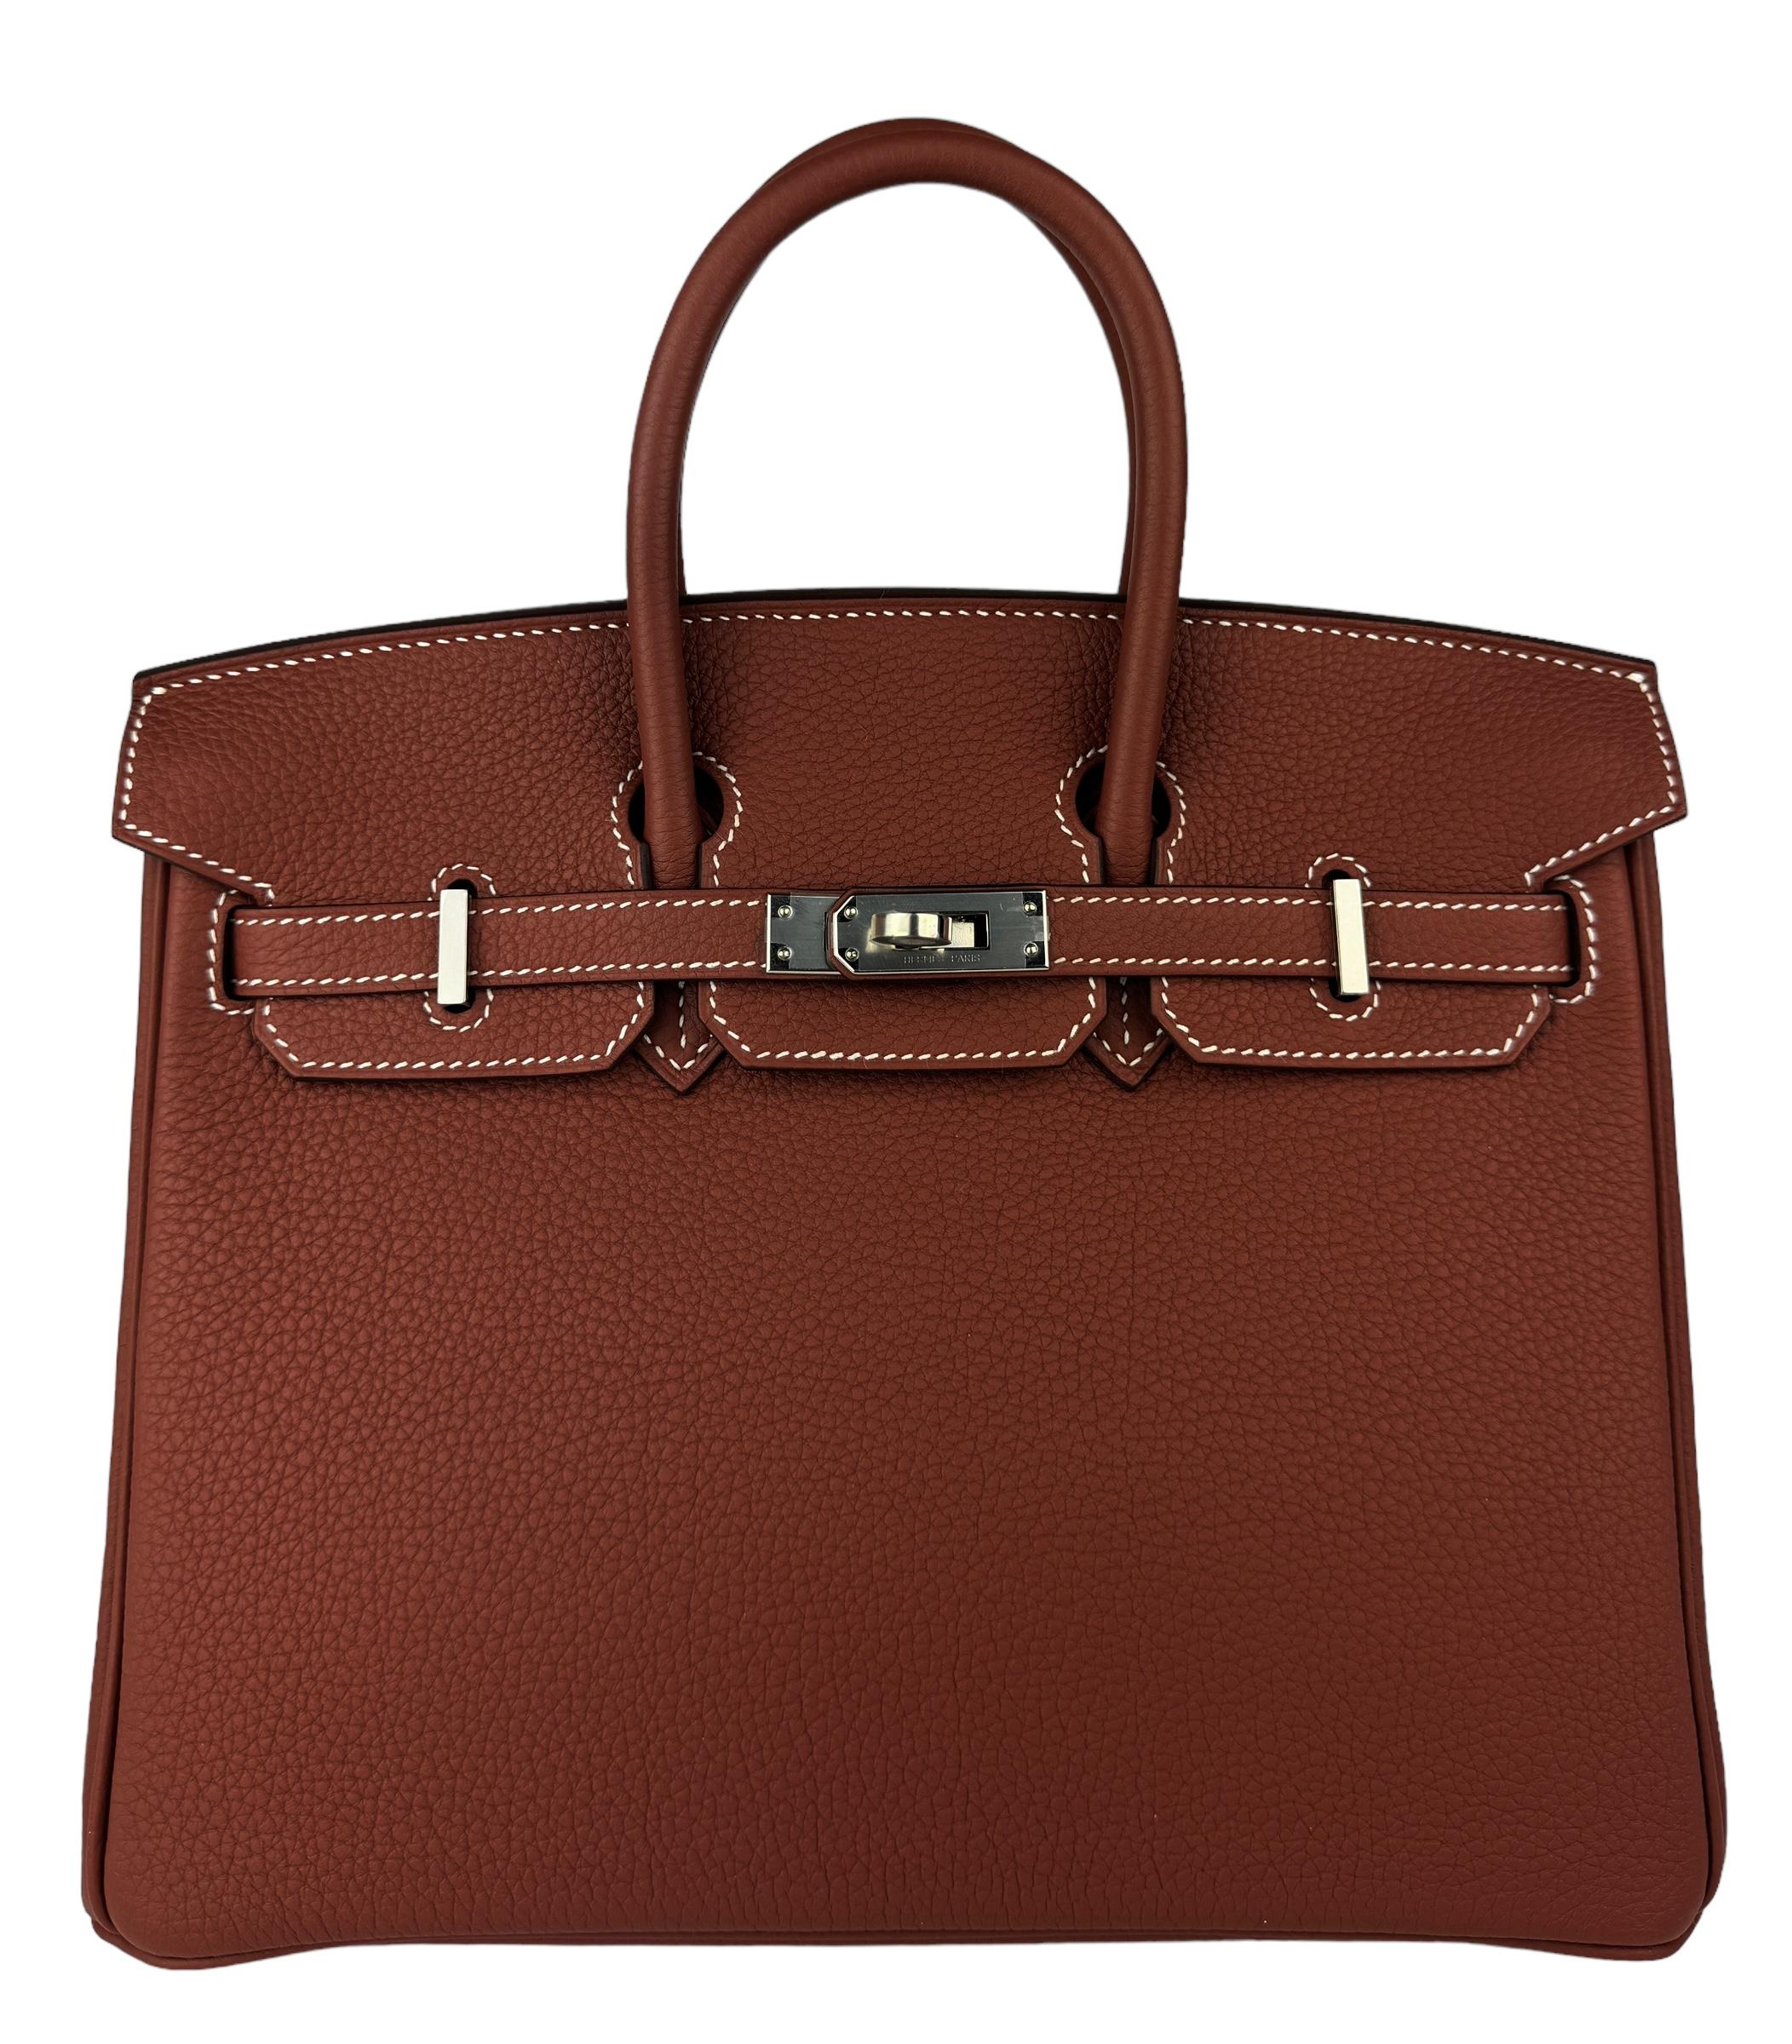 Absolutely Stunning and One The Most Coveted and Difficult to get Hermes Combos! New 2022 Hermes Birkin 25 SienneTogo Leather complimented by Palladium Hardware. U Stamp 2022. Includes all accessories and Box.

Shop with Confidence from Lux Addicts.